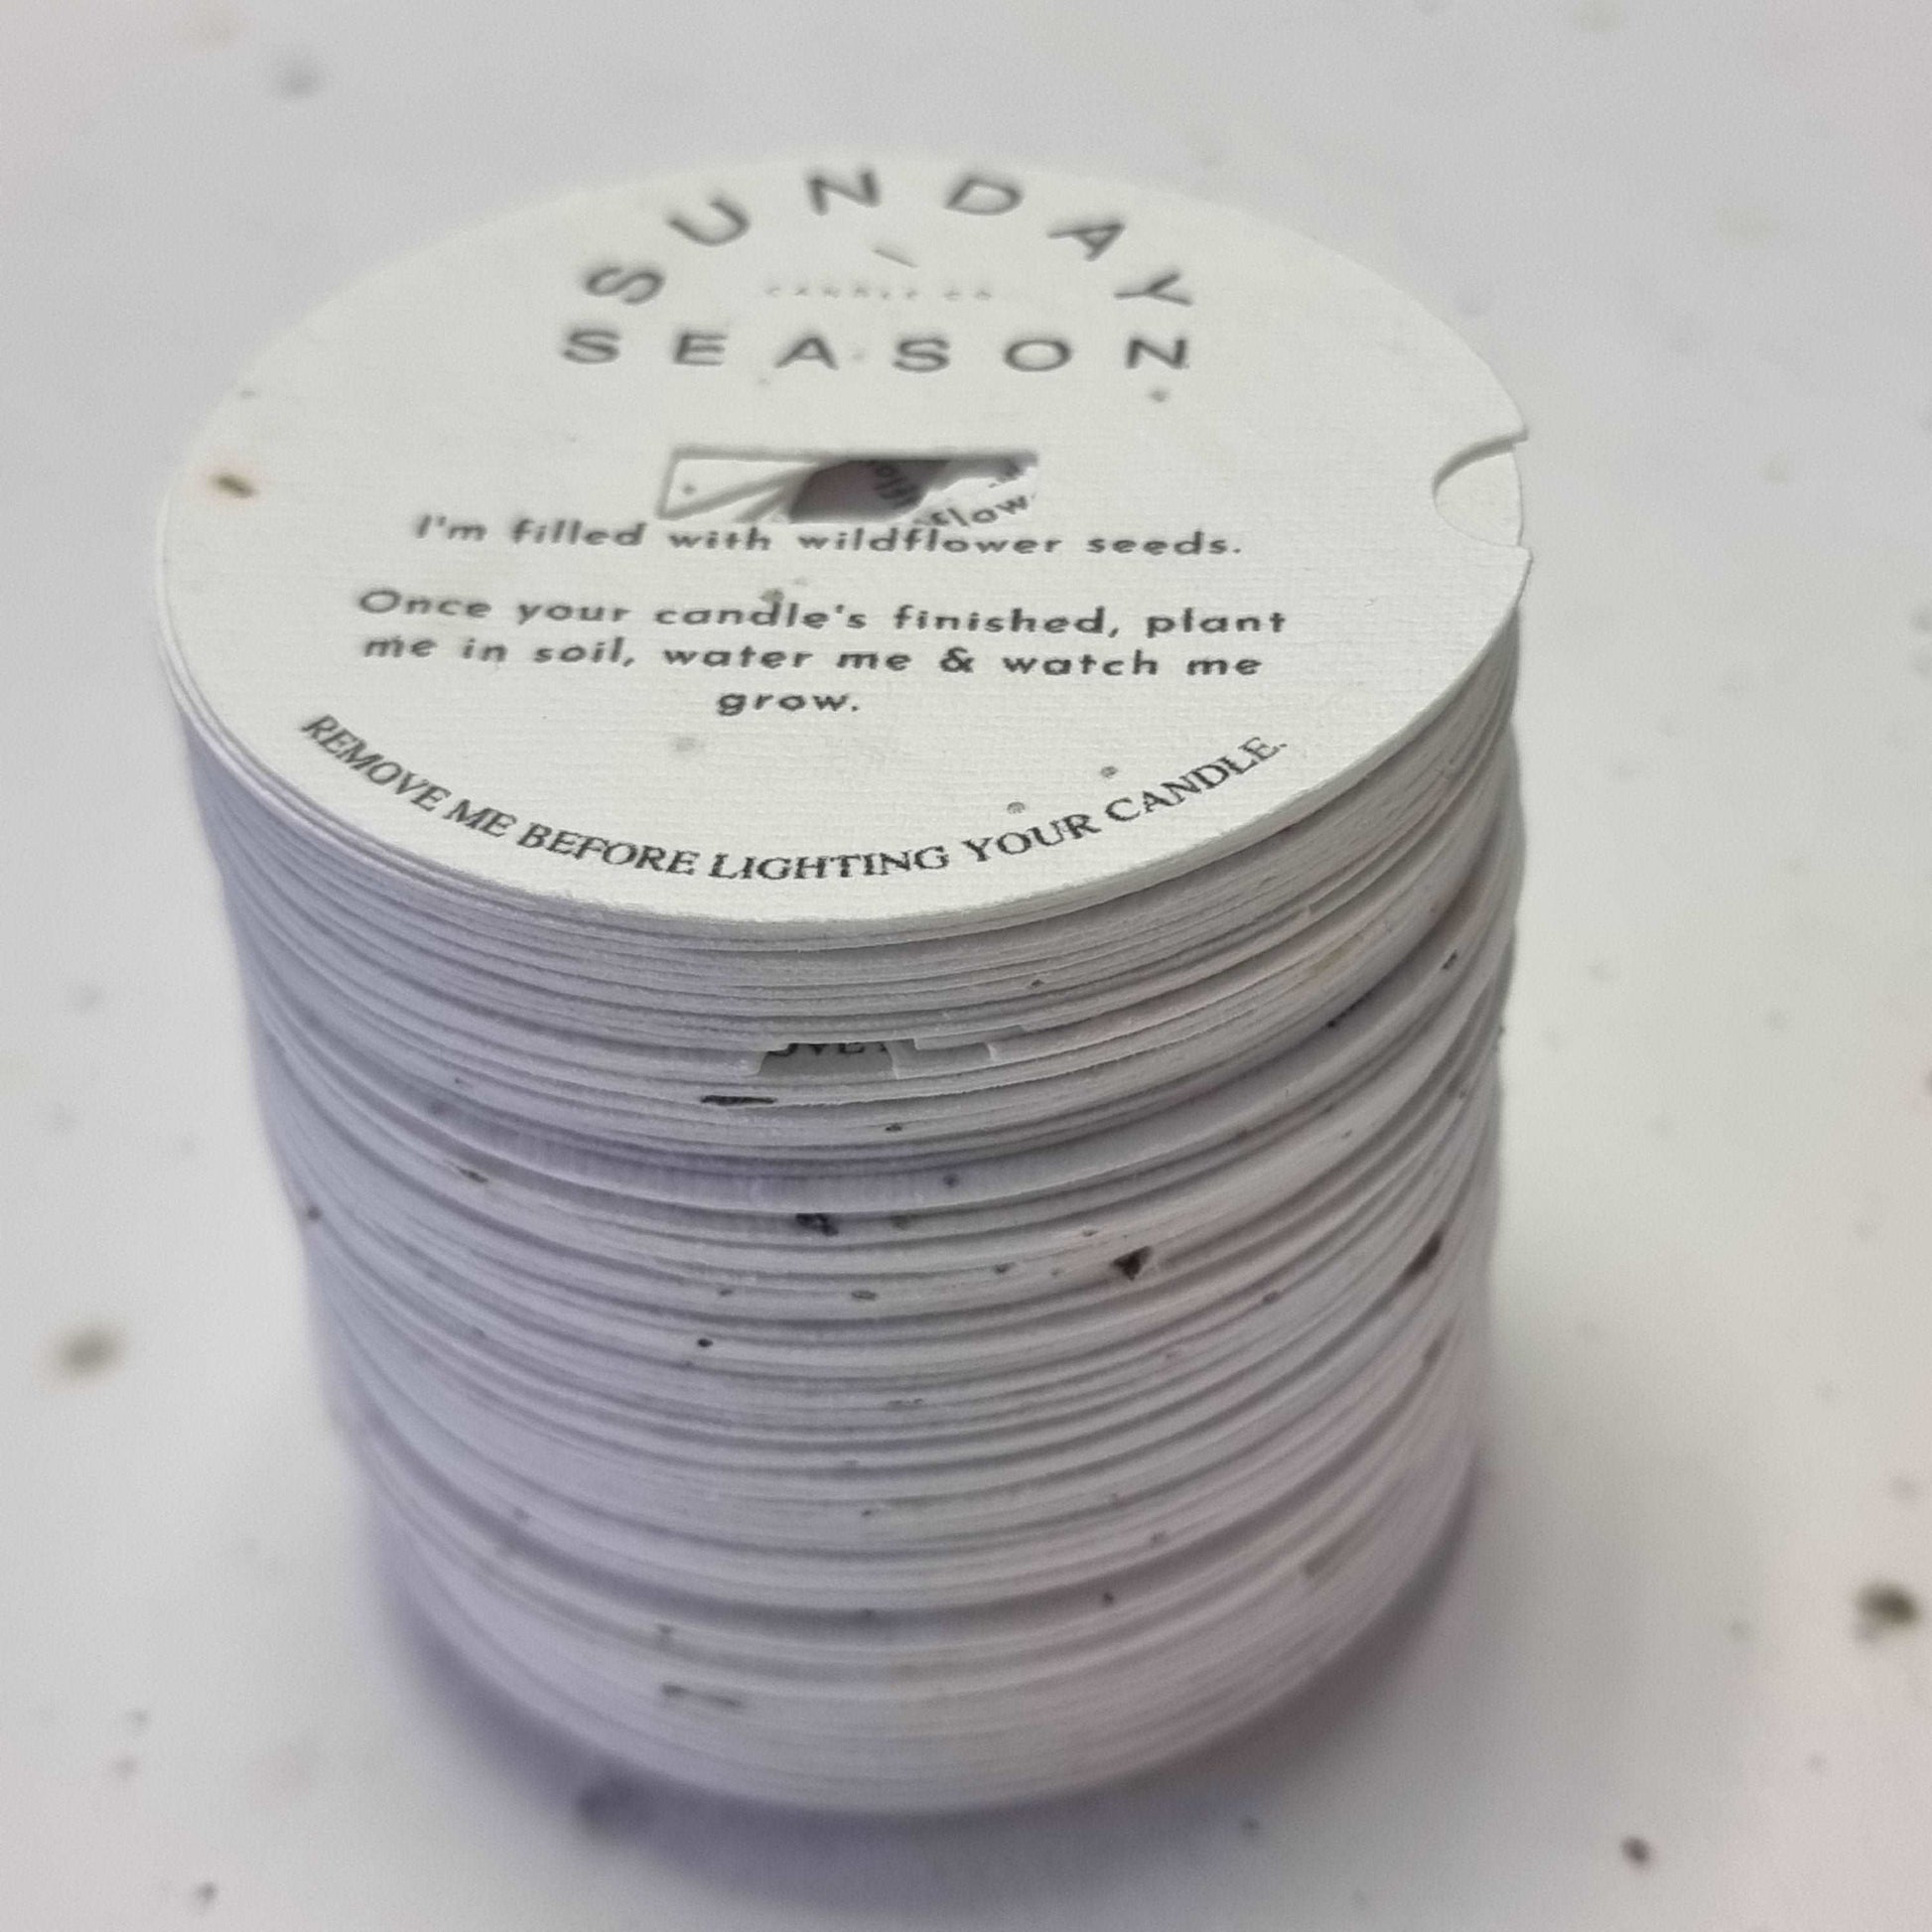 Candle Dust Covers - Custom Candle Dust Cover - 80mm round plus tab +  single wick hole. Printed on 300gsm card and matt laminated both sides.  From 200 pieces.